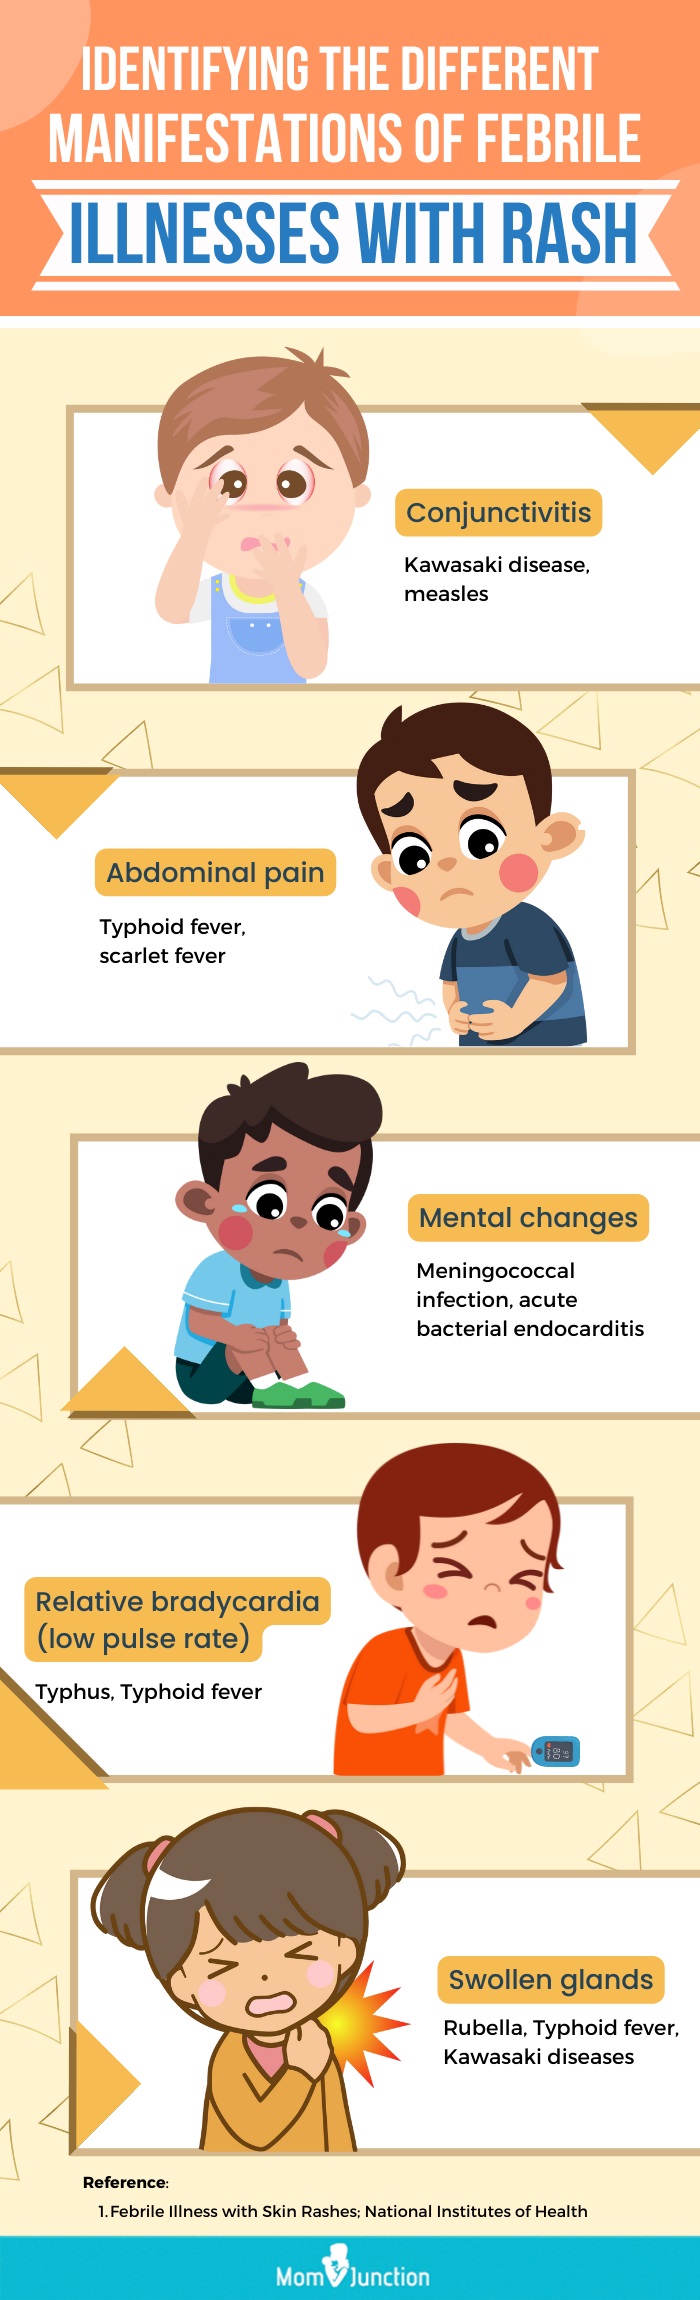 symptoms to identify diseases that cause fever and rash [infographic]